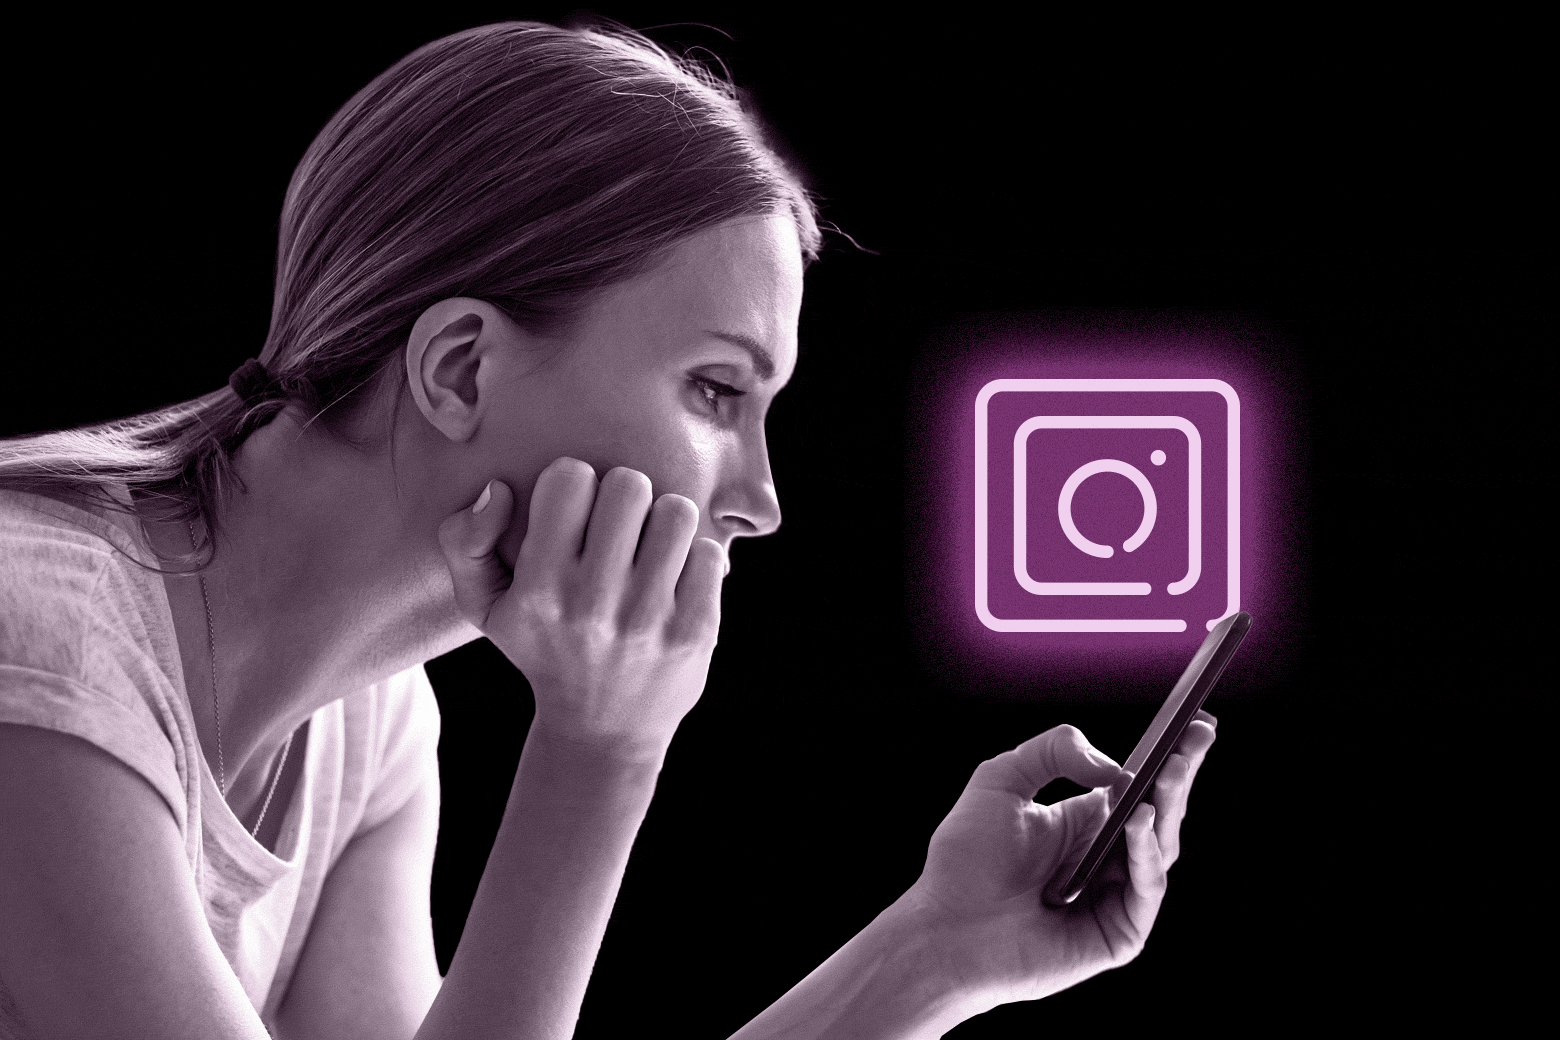 Woman looking at a phone with the Instagram logo.